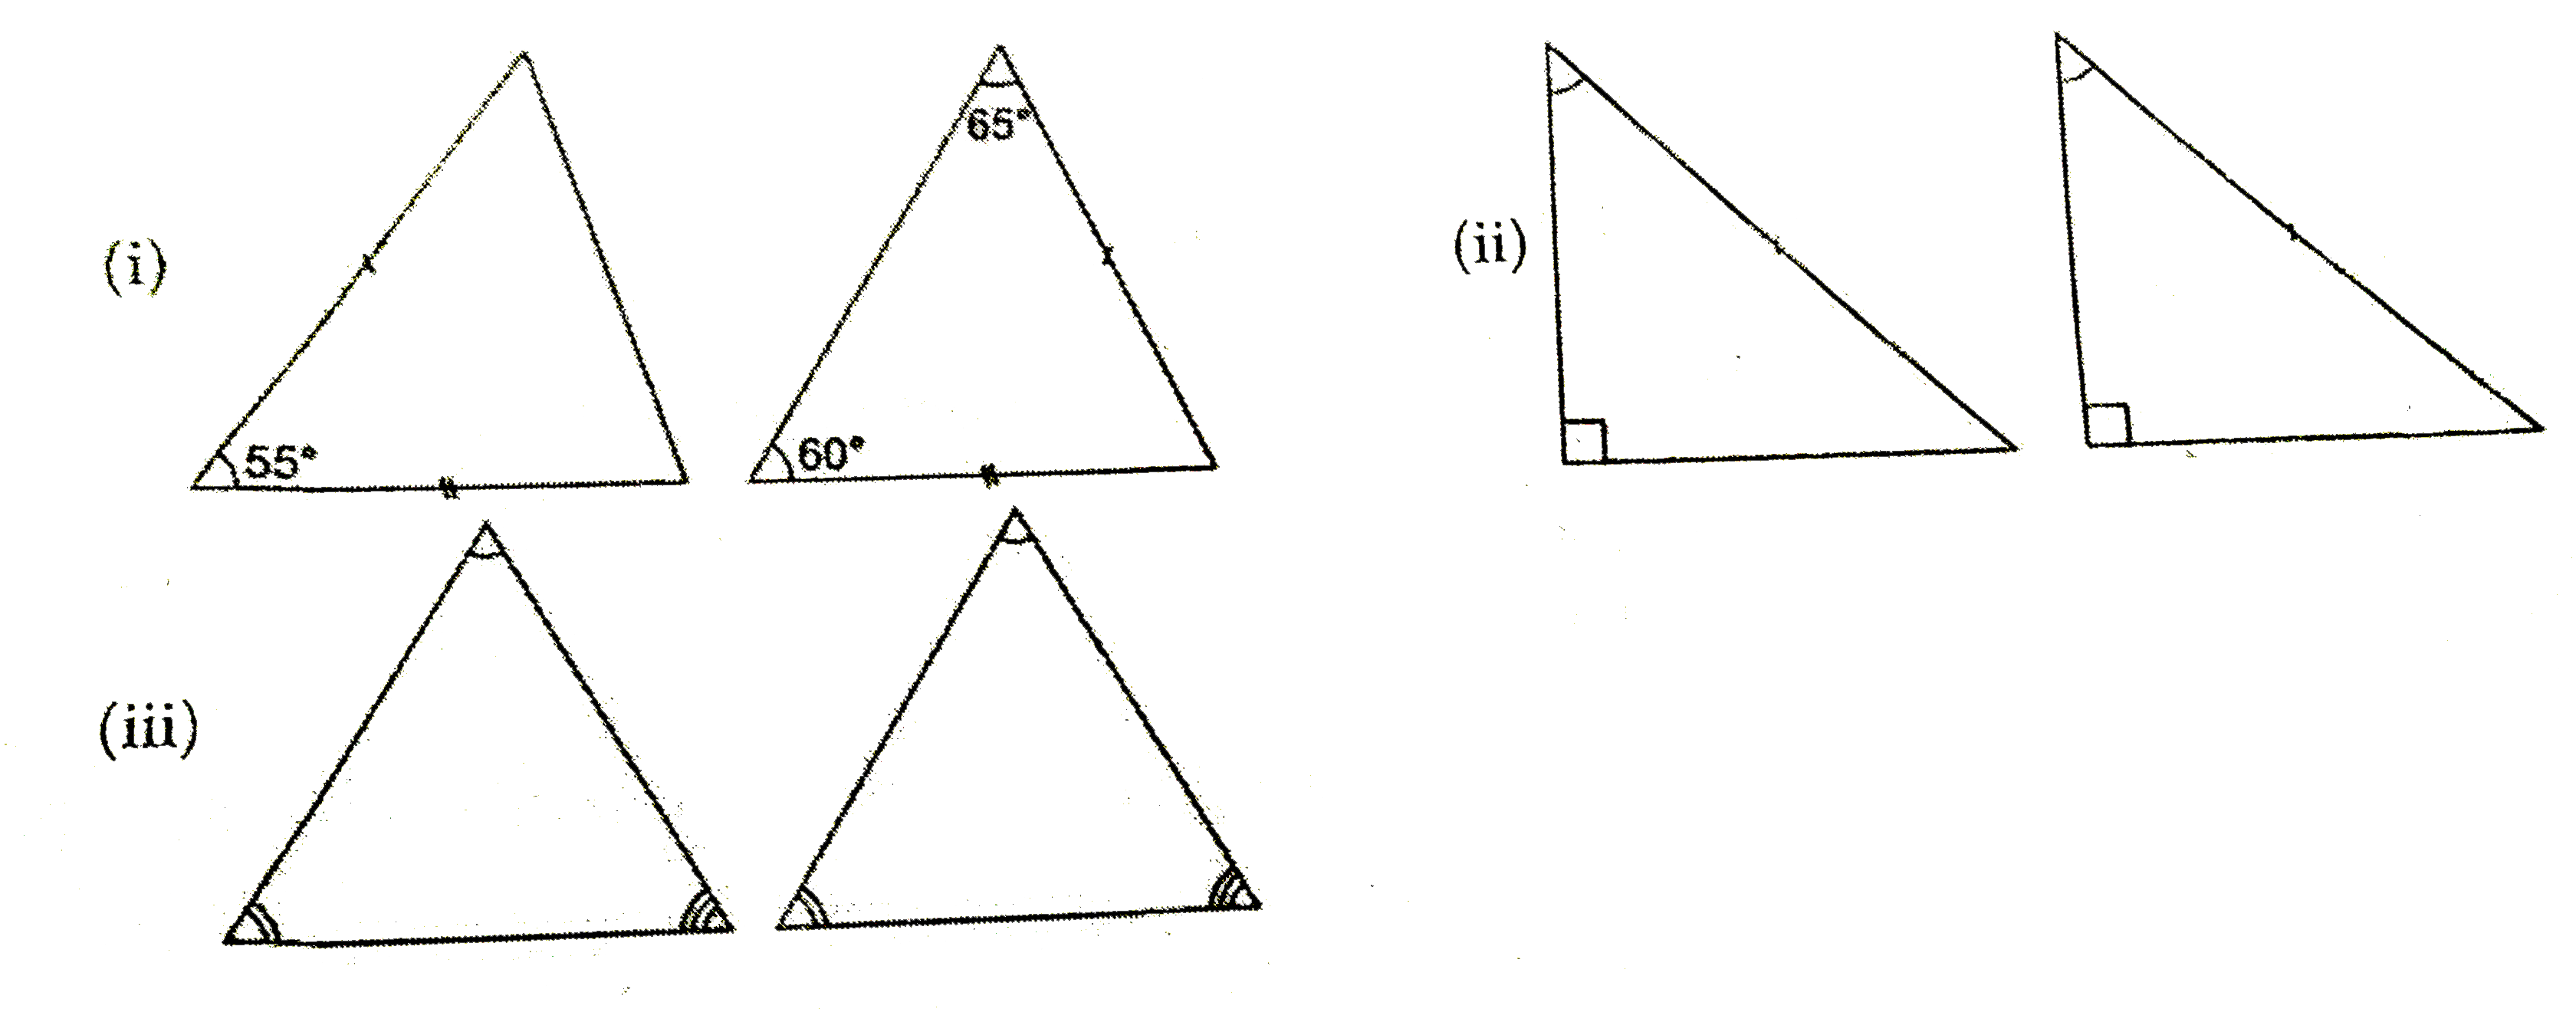 Which of the following pairs of triangles are congruent ? Also state the condition of congruency in each case :      (iv) In DeltaABC and DeltaDEF, AB=EF, BC=DF and angleB=angleF   (v) In DeltaABC and DeltaPQR, AB=QR, AC=PR and angleB=angleR   (vi) In DeltaABC and DeltaPQR, angleA=angleP, AC=PR and AB=PQ   (vi) In DeltaABC and DeltaPQR, AB=QR, angle A=angle Q and AC=QP.